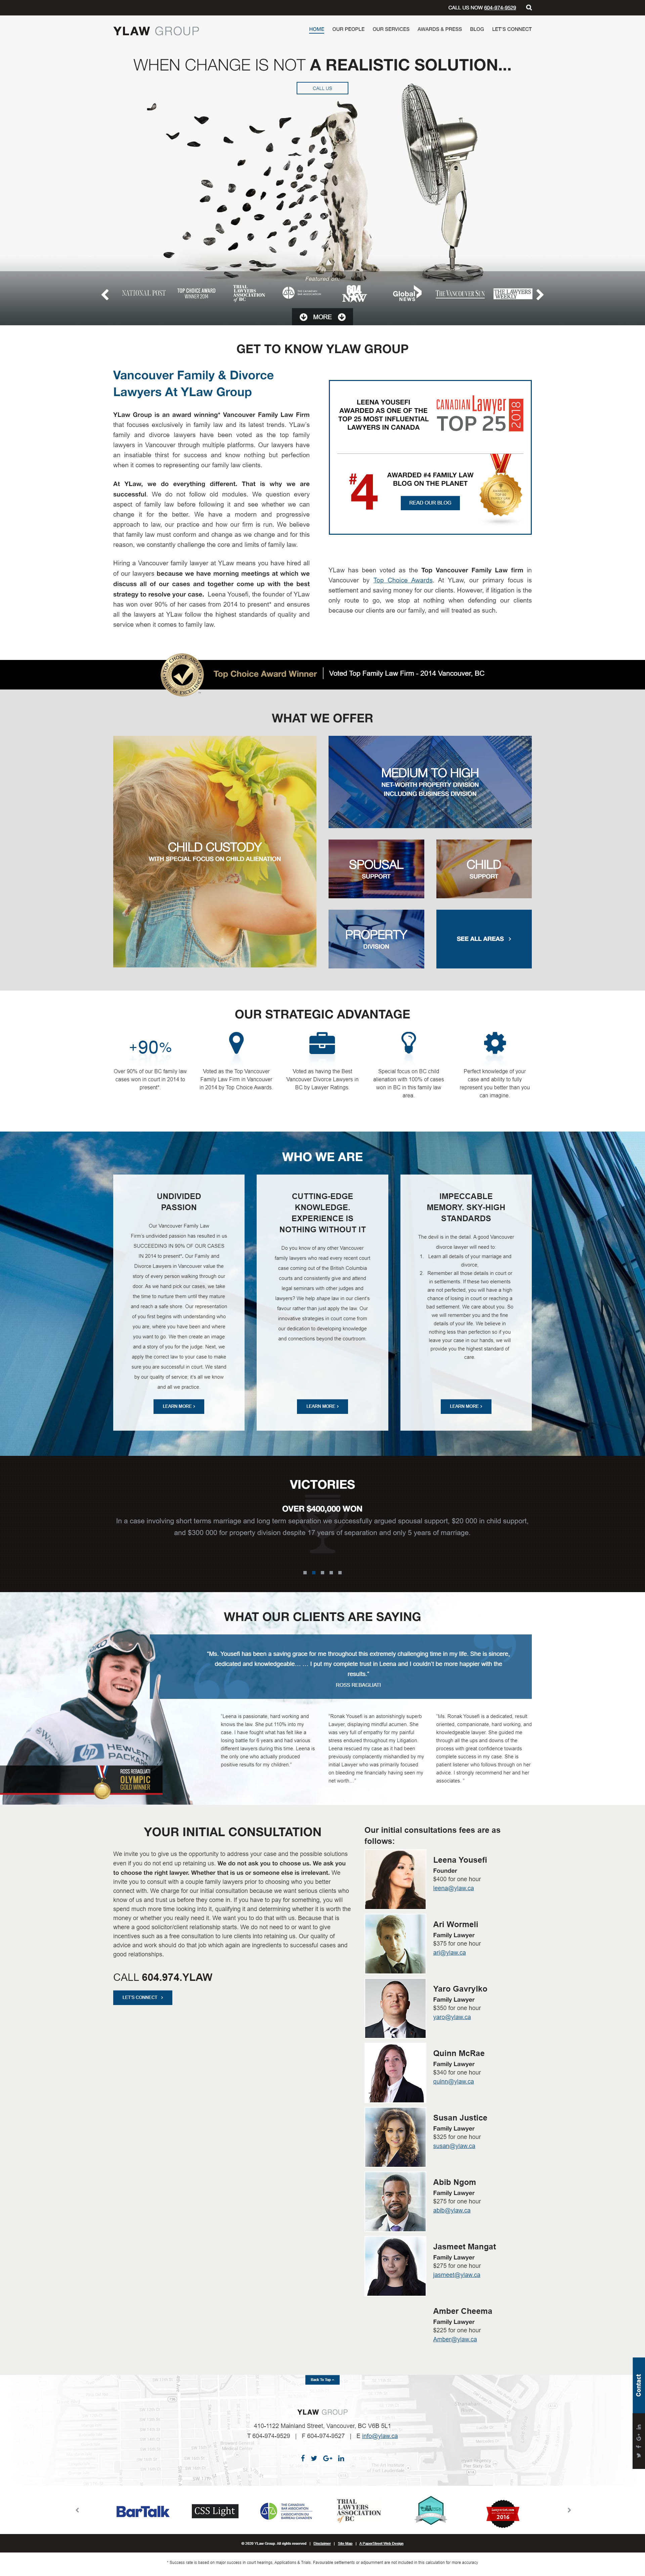 Previous Family Law Firm Website Design Sample